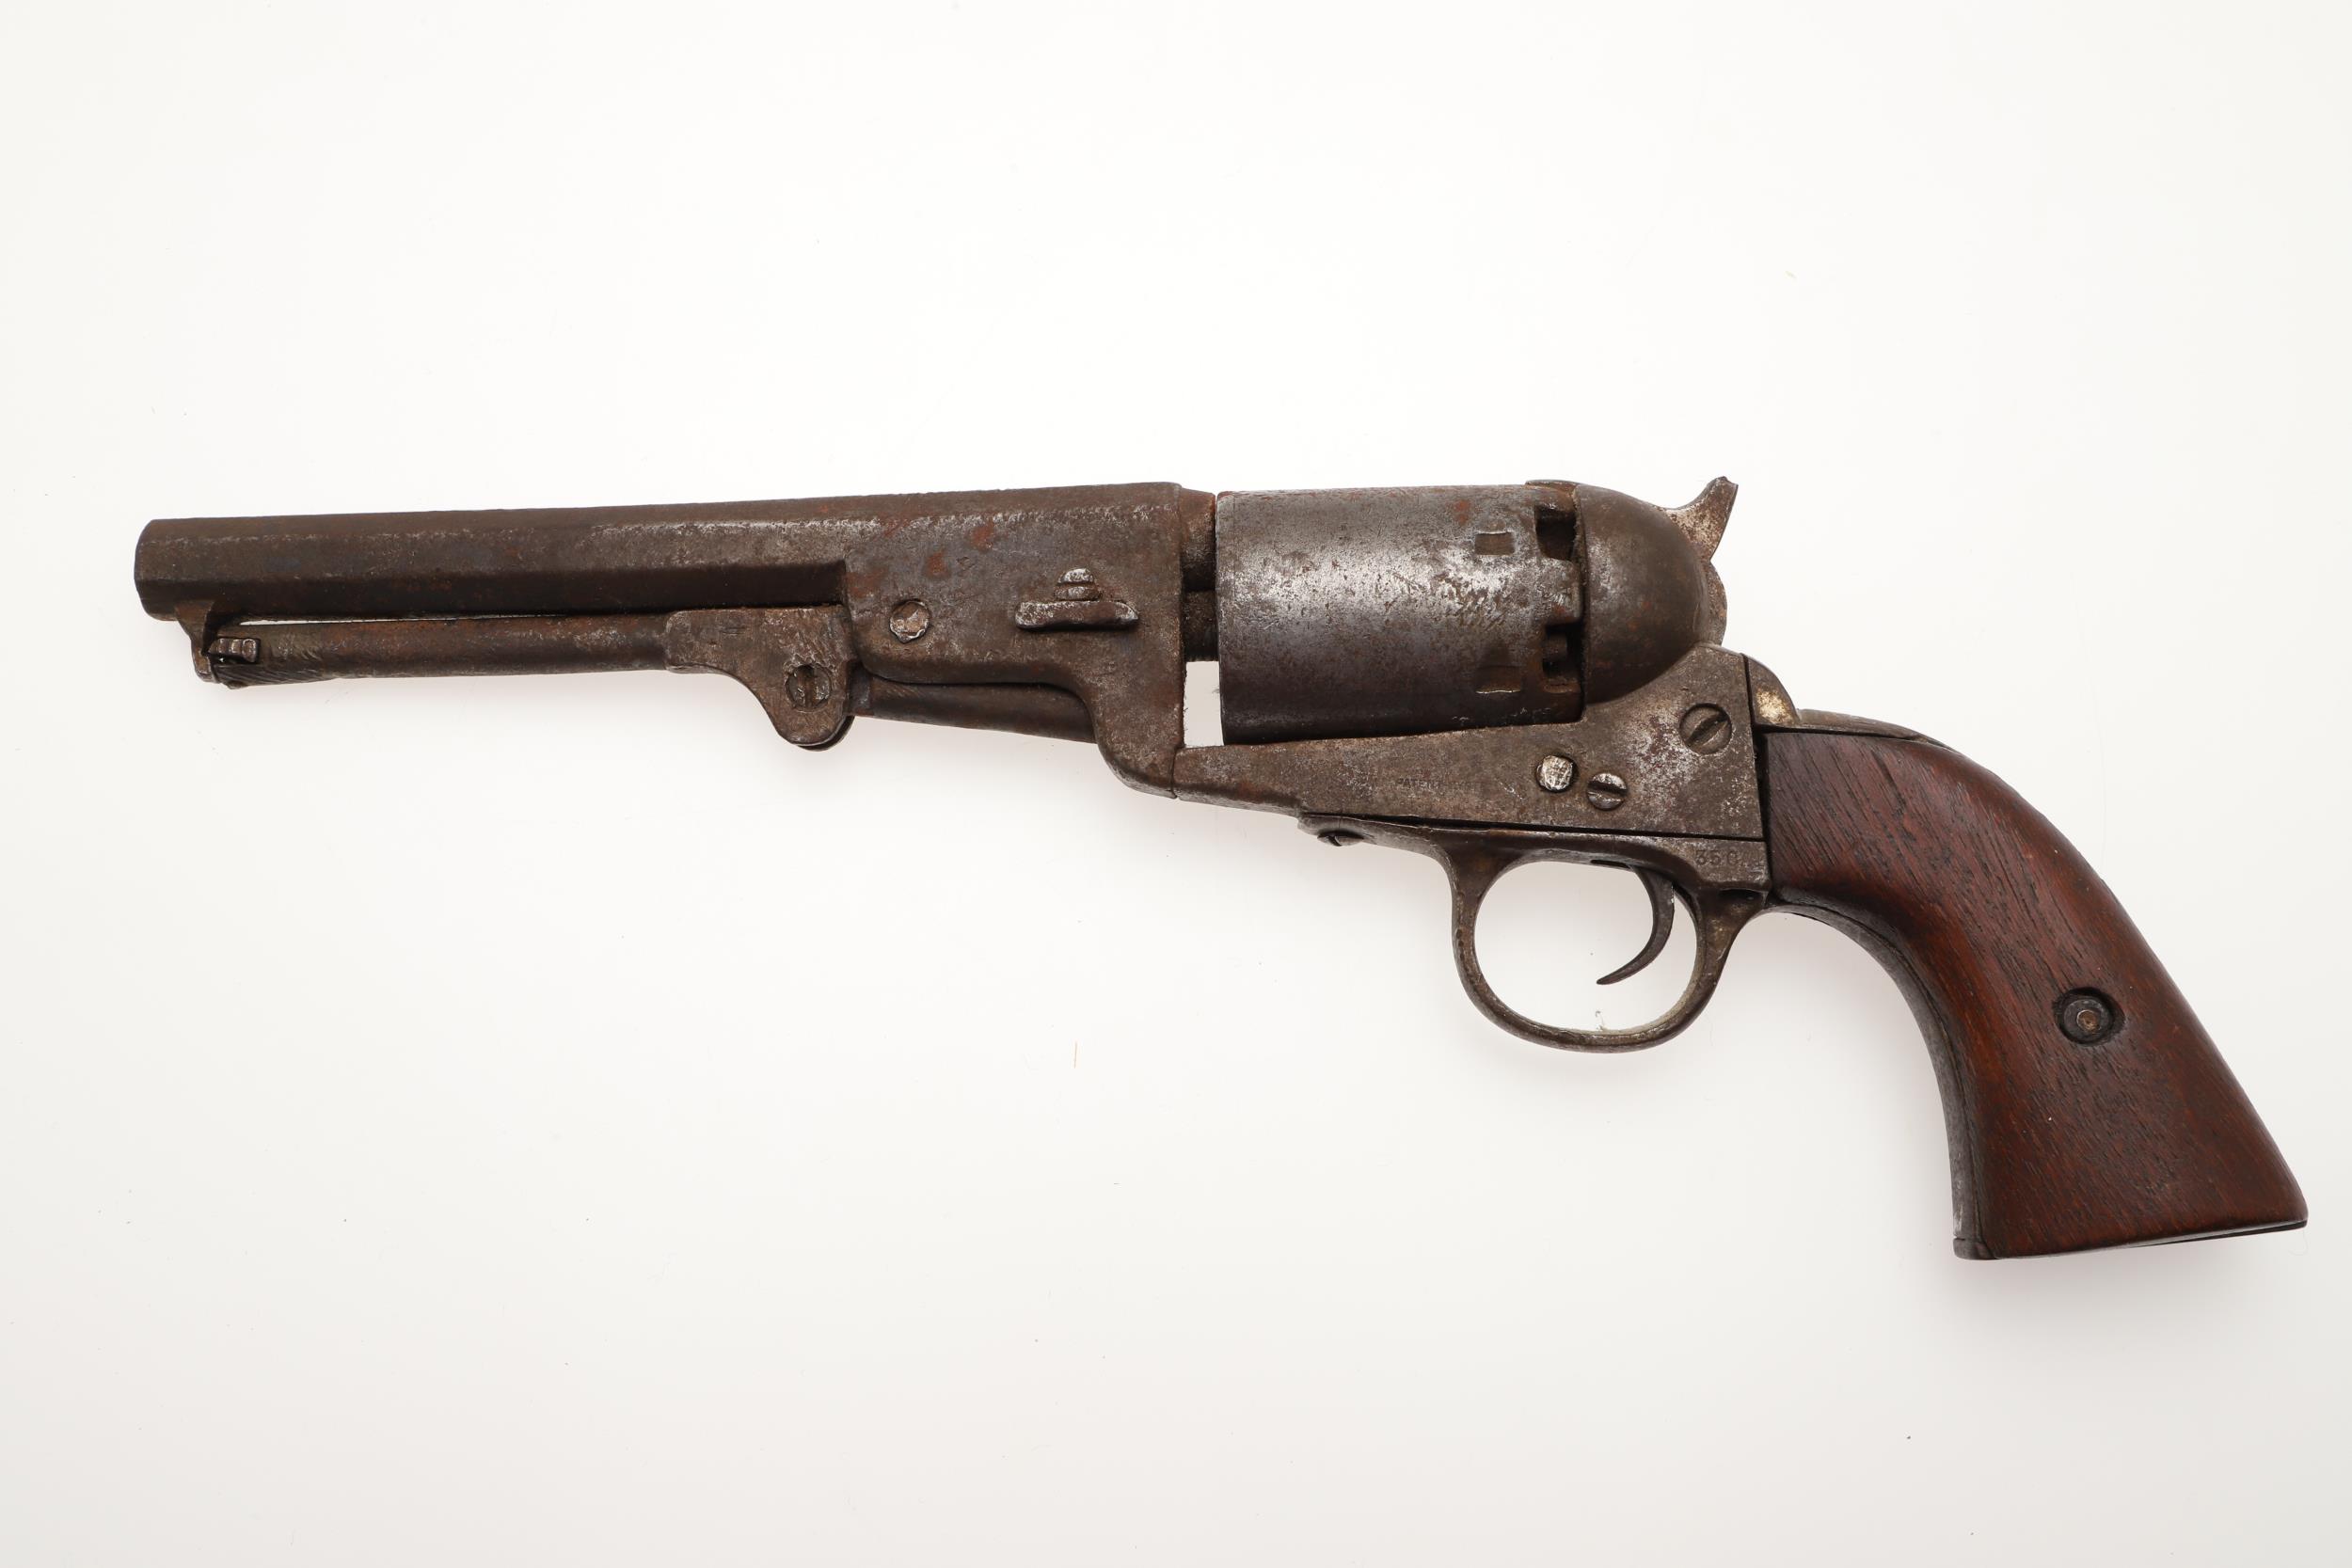 A COLT STYLE PERCUSSION FIRING REVOLVER. - Image 2 of 5